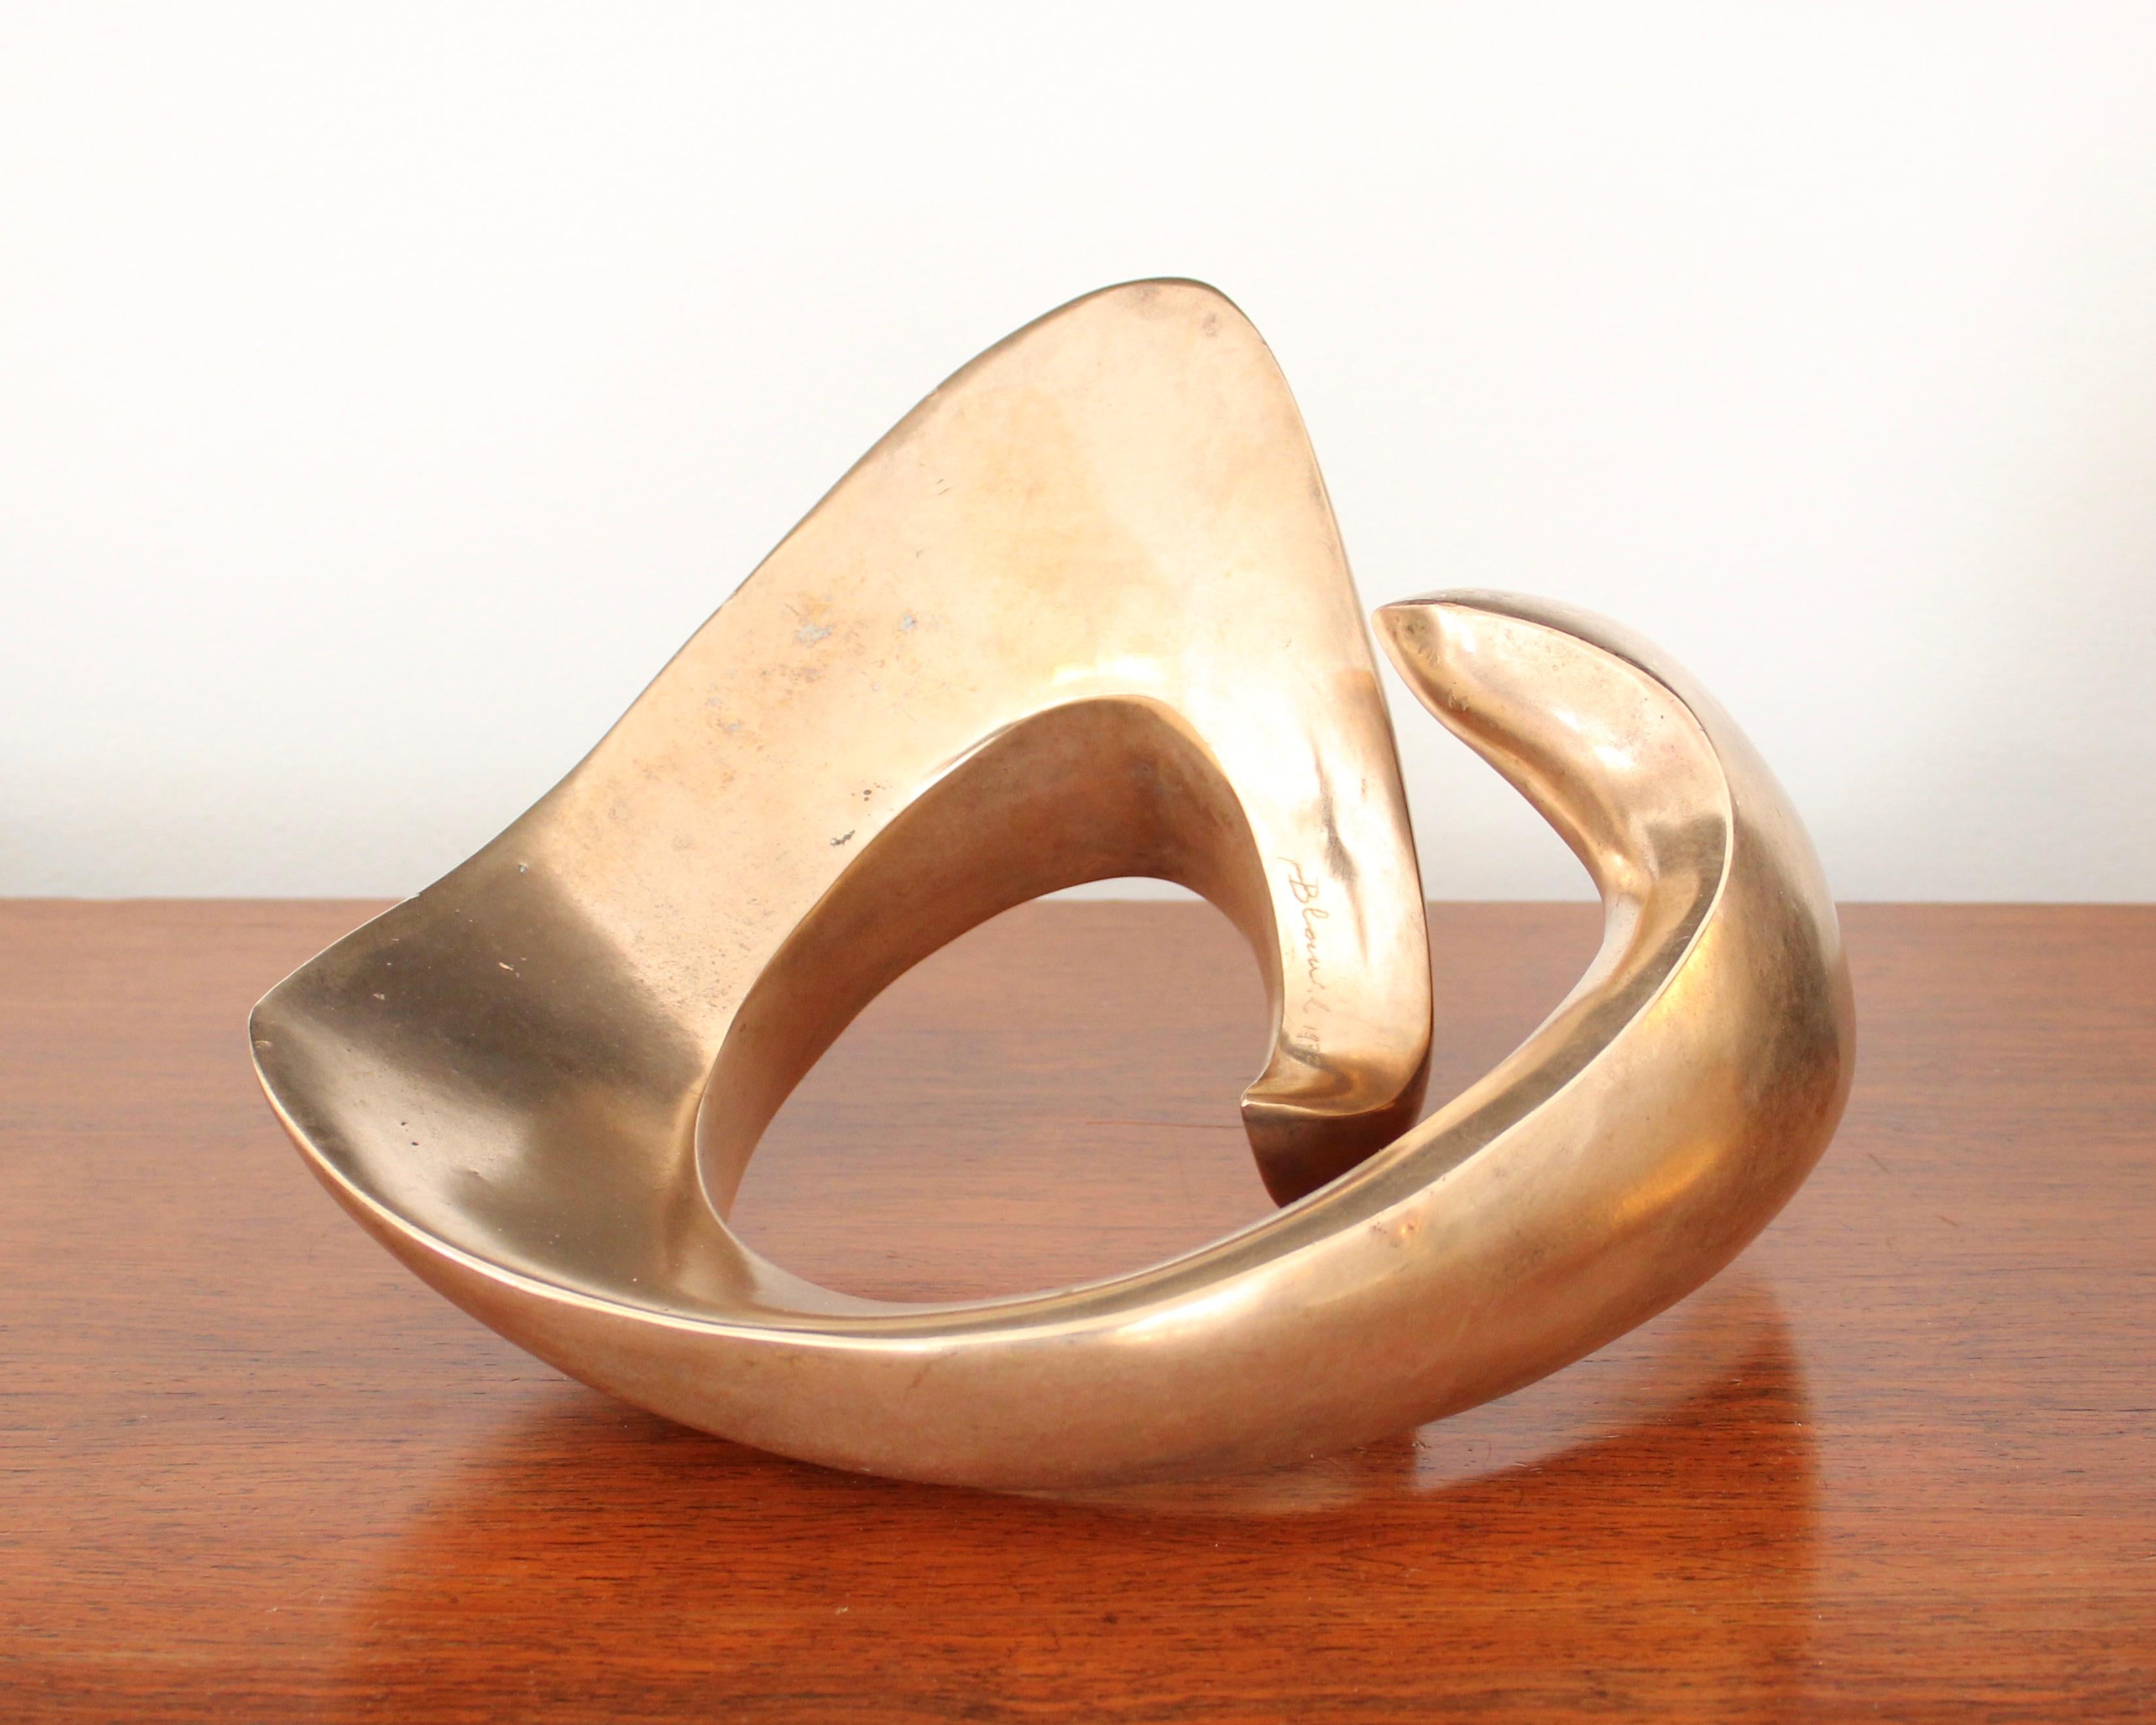 Bronze organic abstract form sculpture with a minimal curvilinear gesture.
Signed but difficult to read signature, dated 1977. 
Amsterdam origin. Weight is 10 lbs.